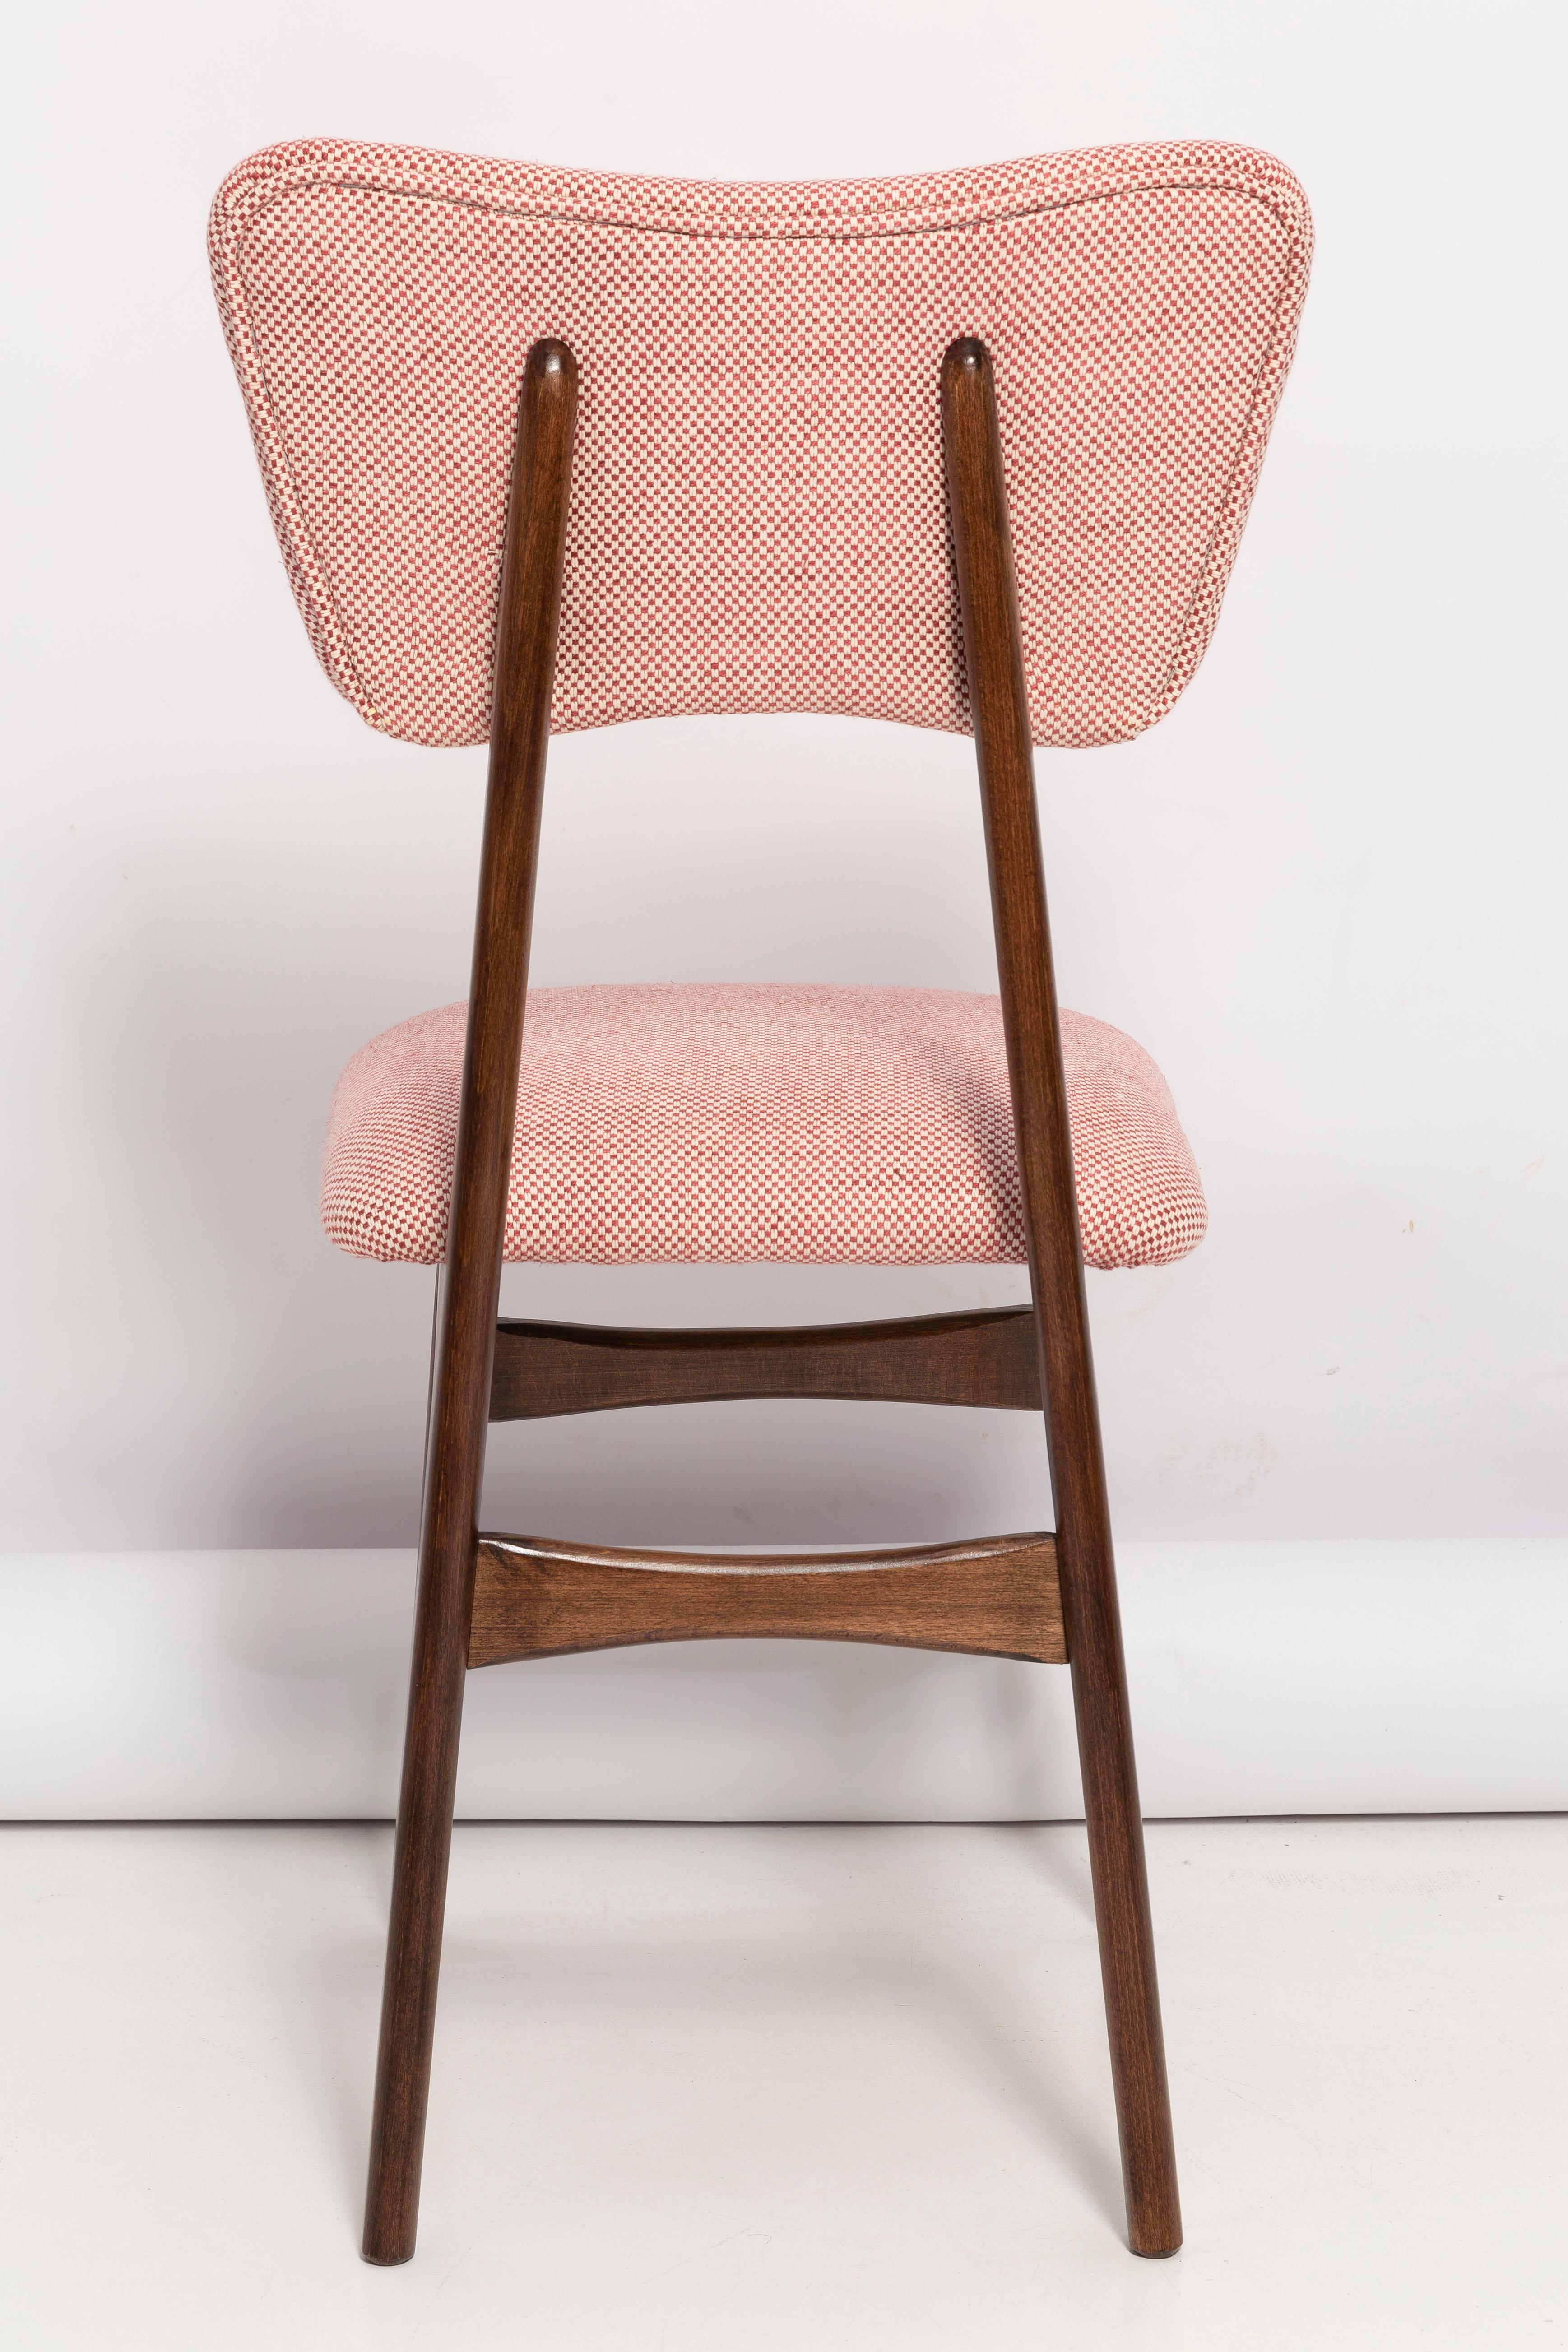 Set of Eight Mid Century Butterfly Dining Chairs, Peony Cotton, Poland, 1960s For Sale 3